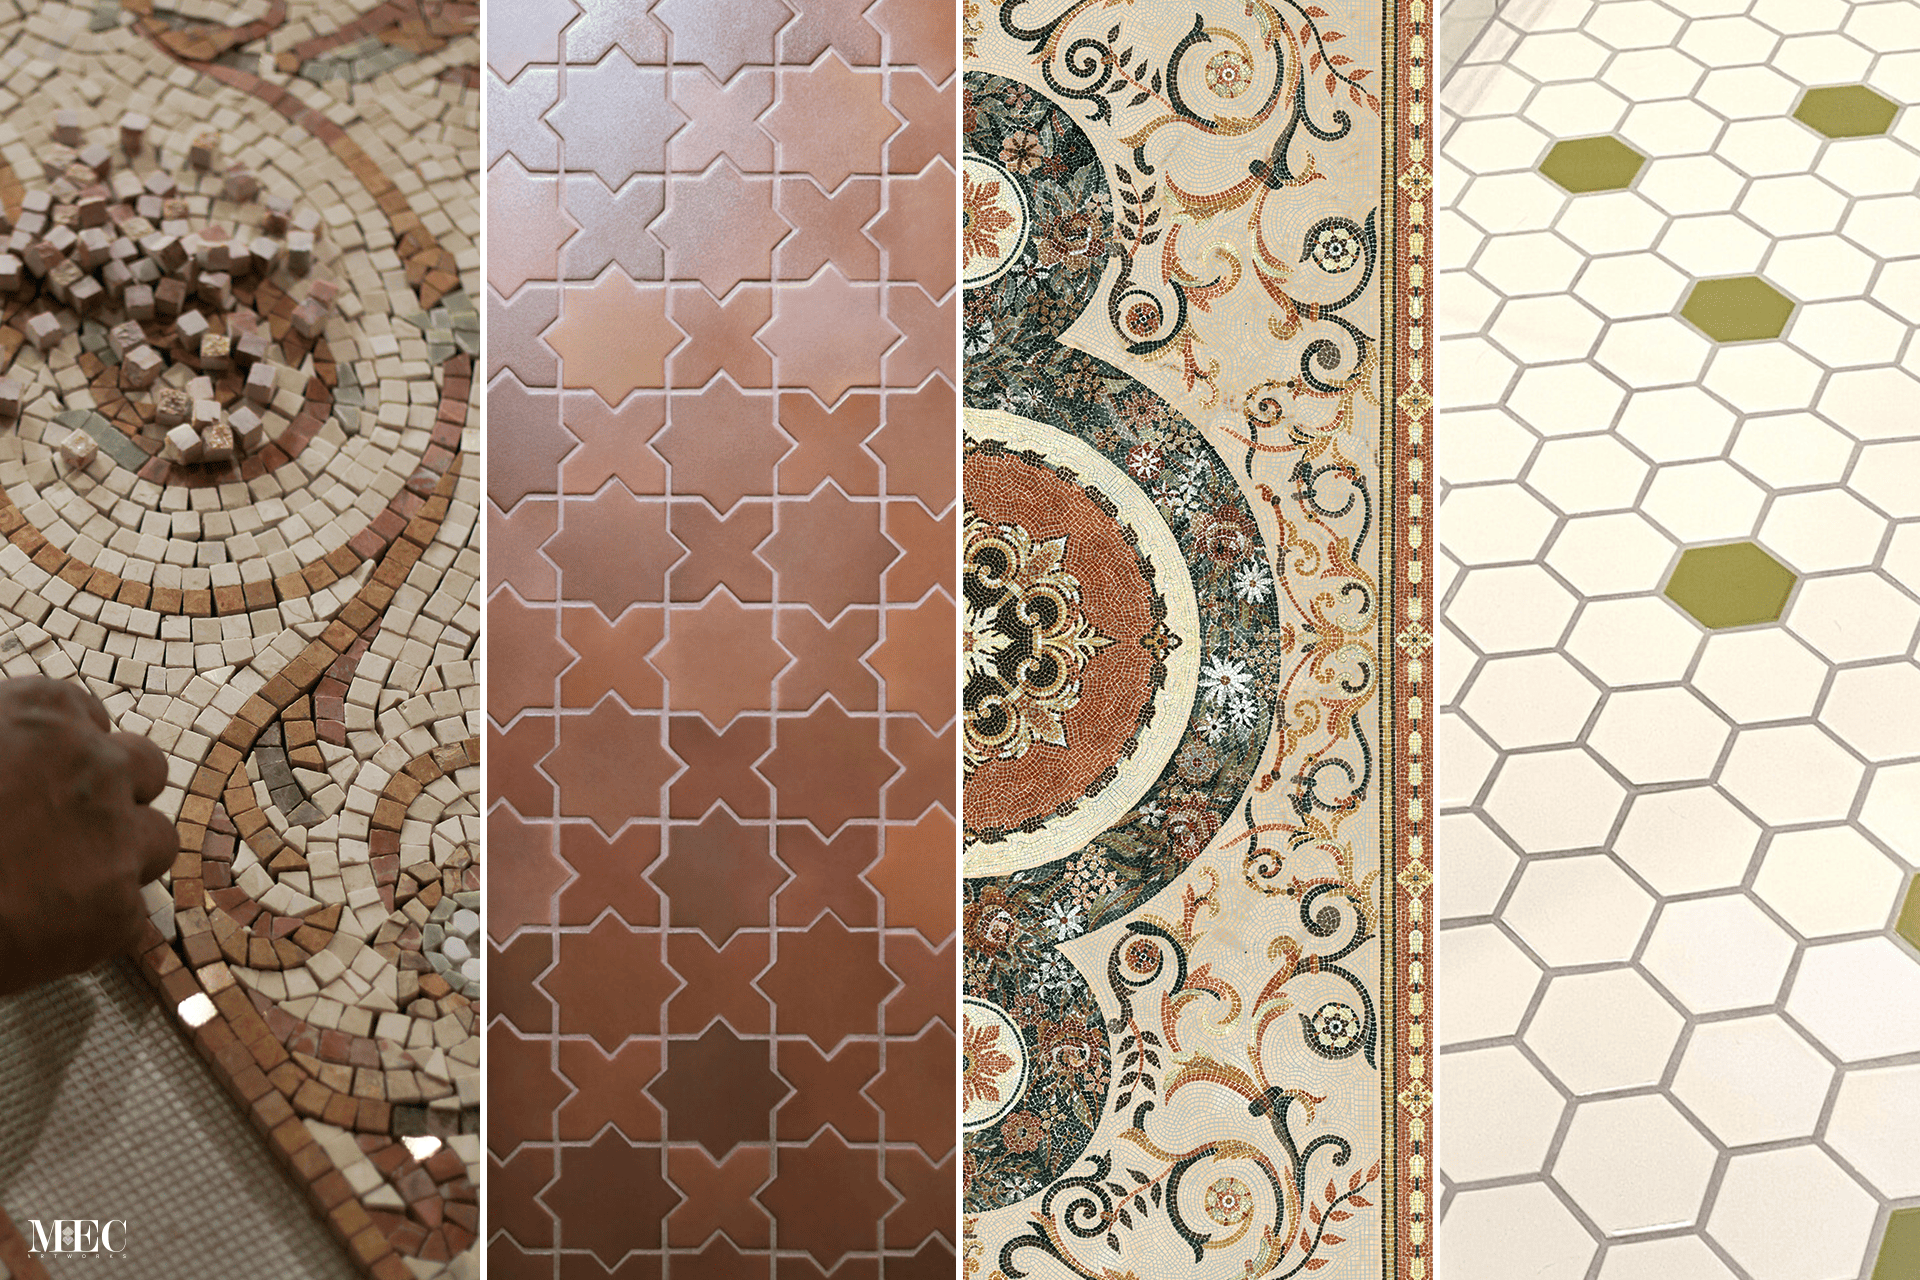 A collage comparison between mosaic tiles for floor and other tile options